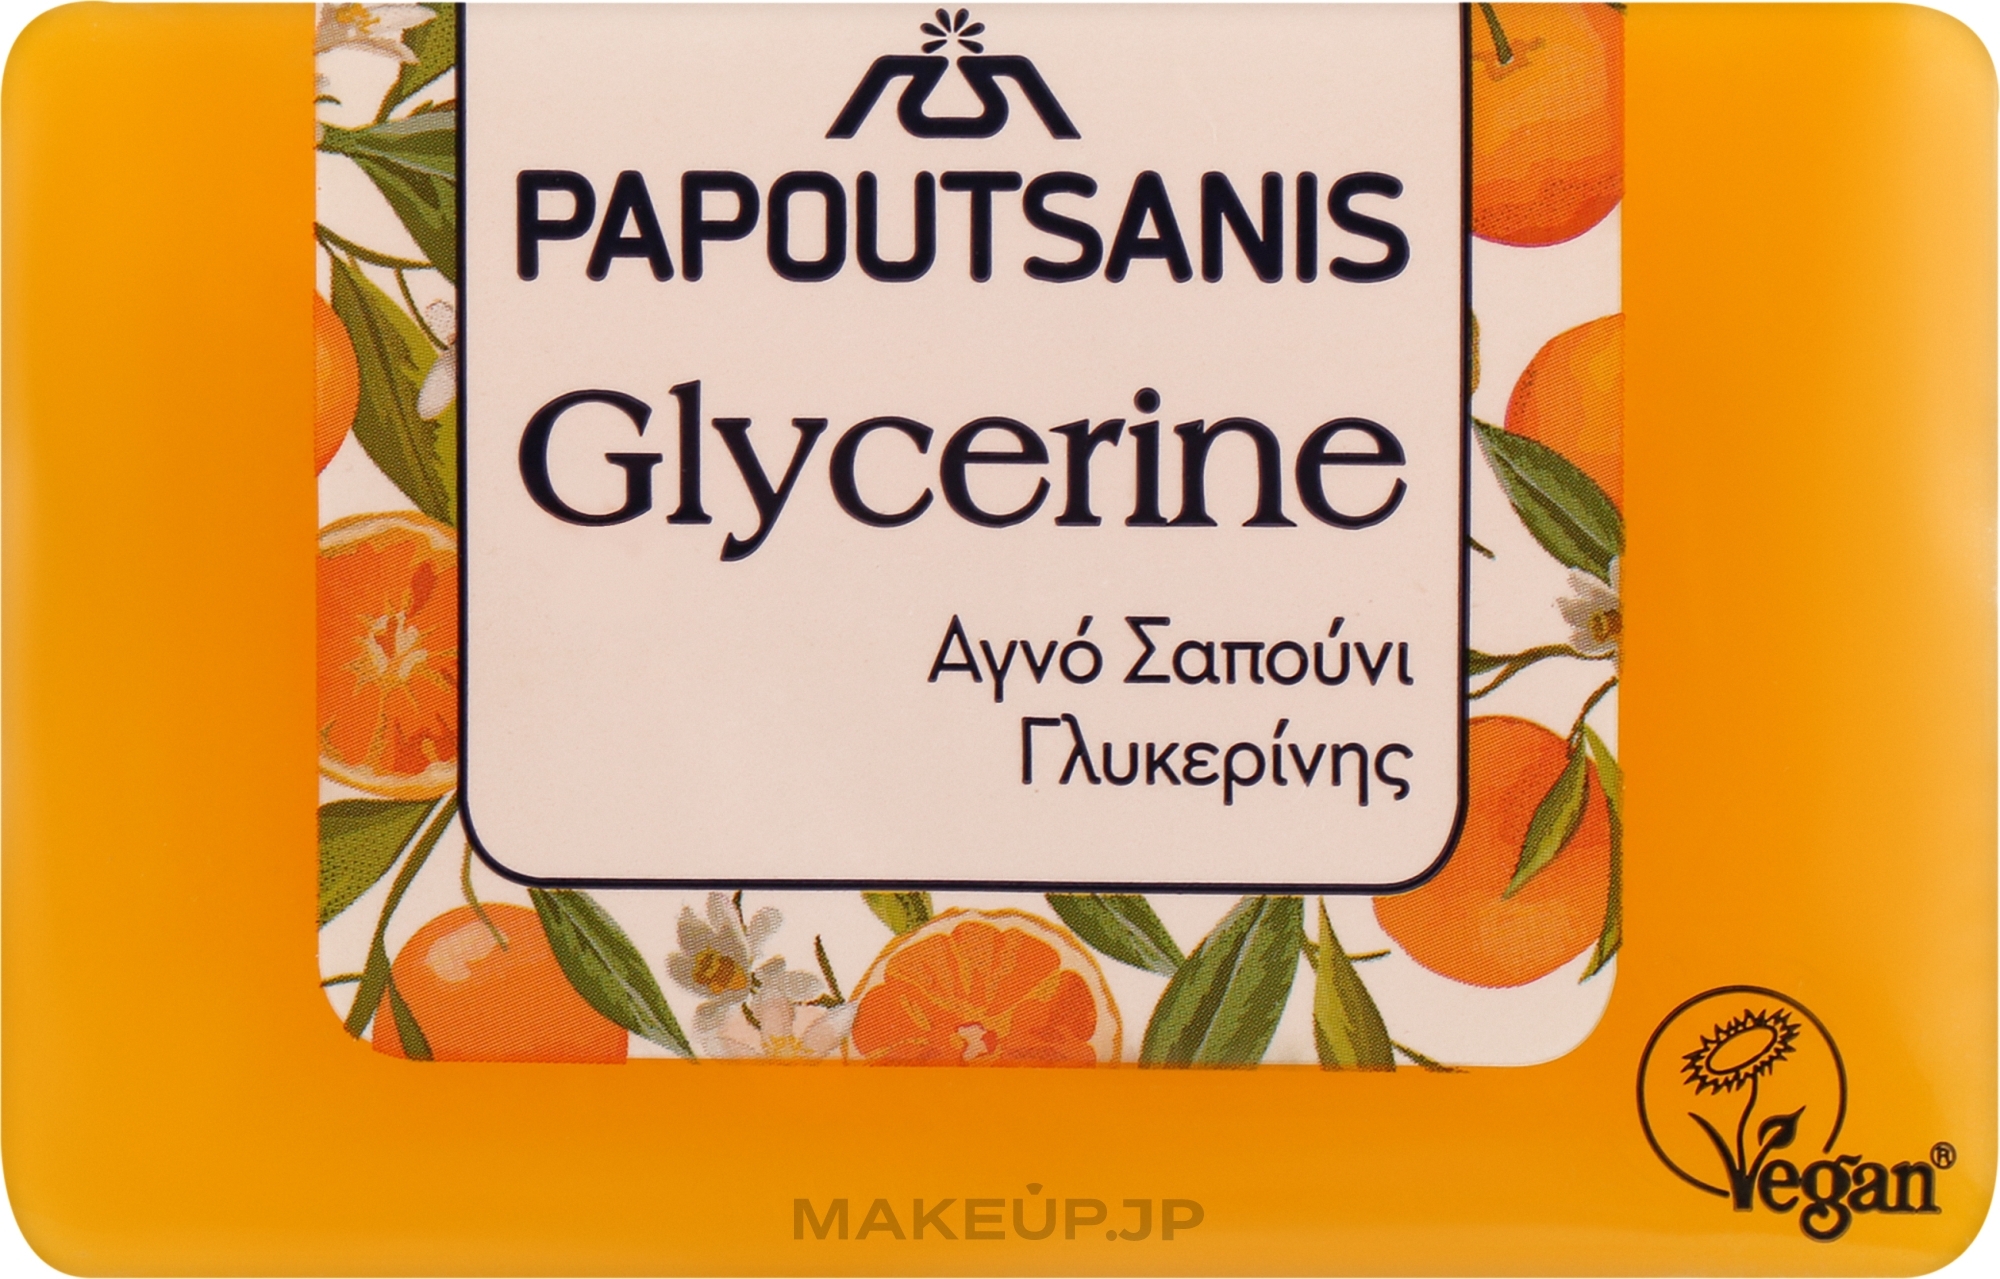 Glycerin Soap with Spicy Orange Scent - Papoutsanis Glycerine Soap — photo 125 g